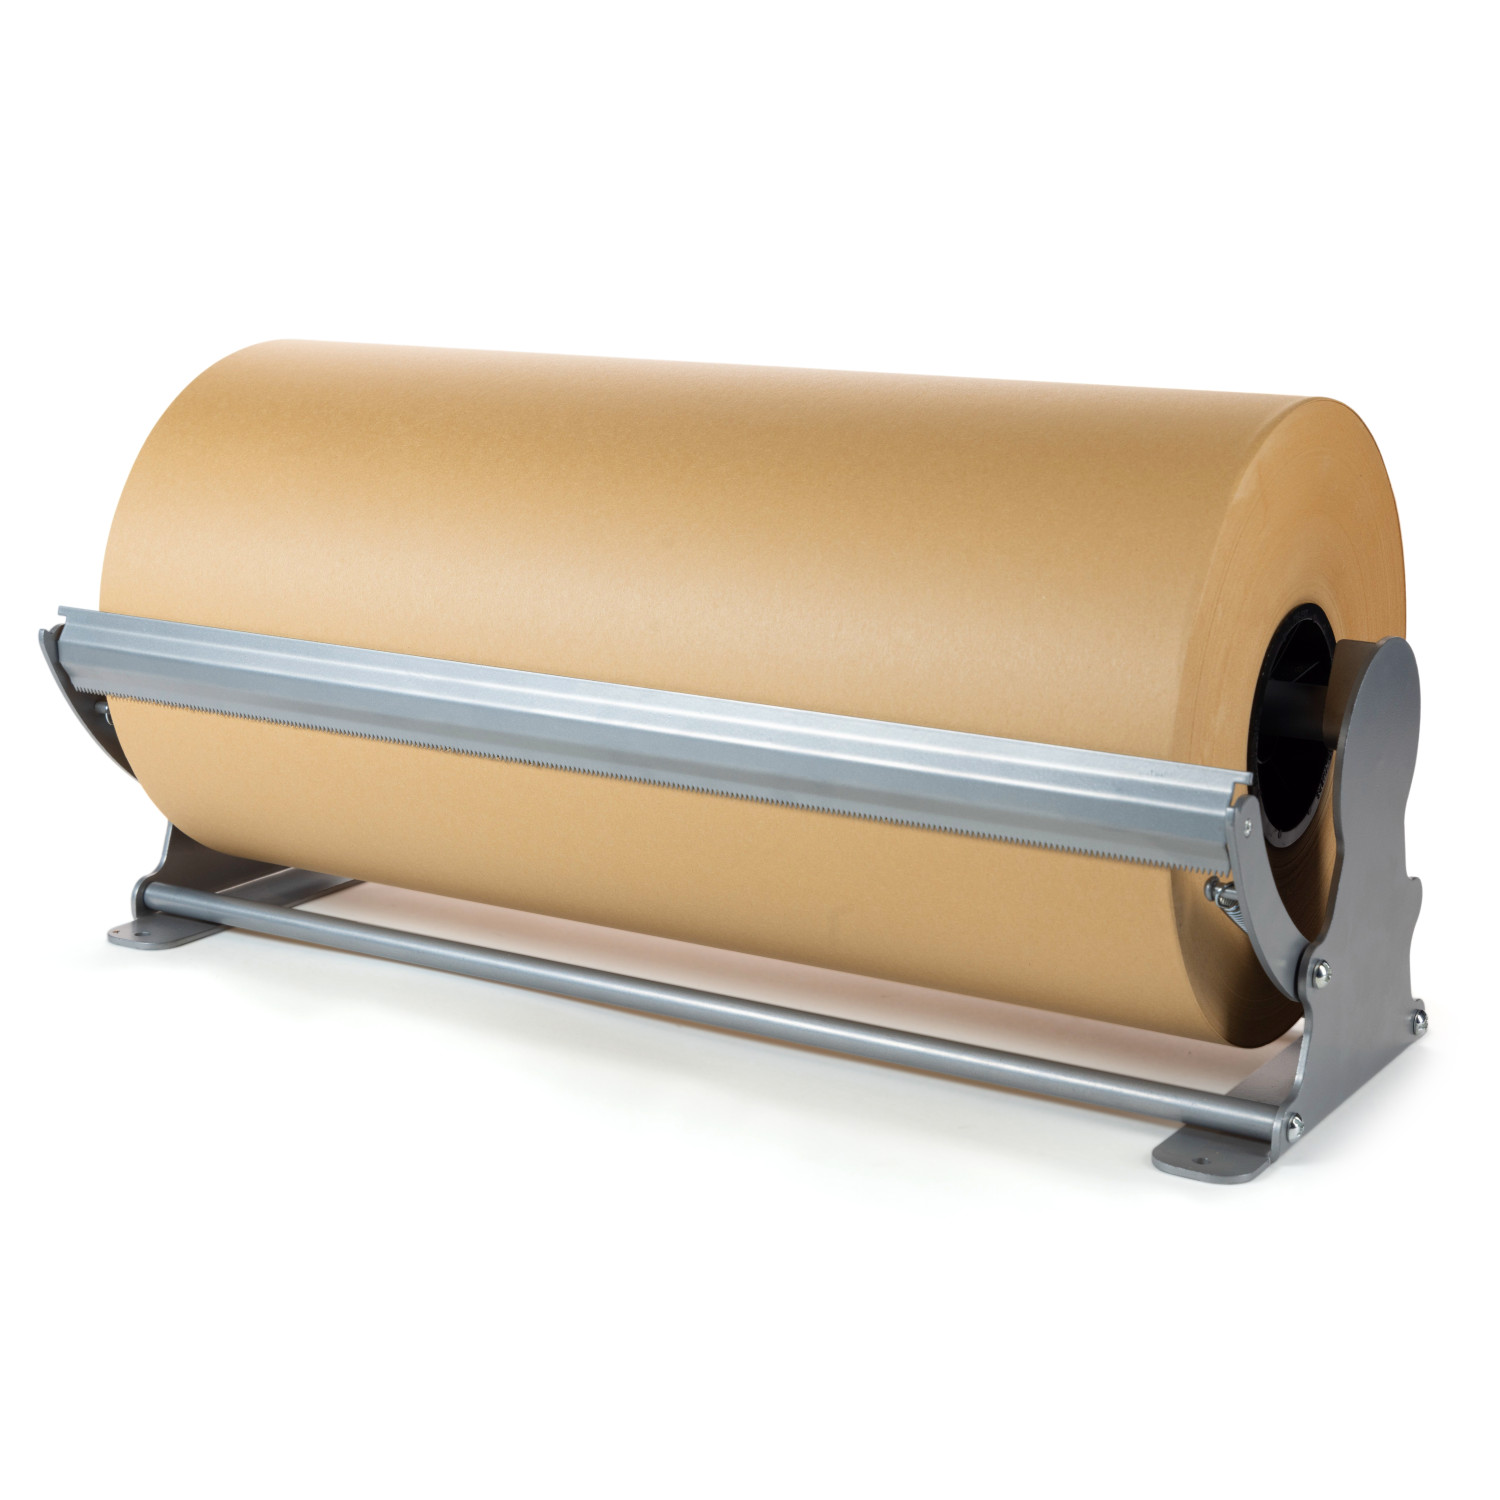 IDL Packaging PD-18 Durable Kraft and Butcher Paper Dispenser & Cutter for  up to 18 Width and 10 Diameter Rolls – Horizontal Tabletop Paper Roll  Holder – Steel Dispenser with Cutter 